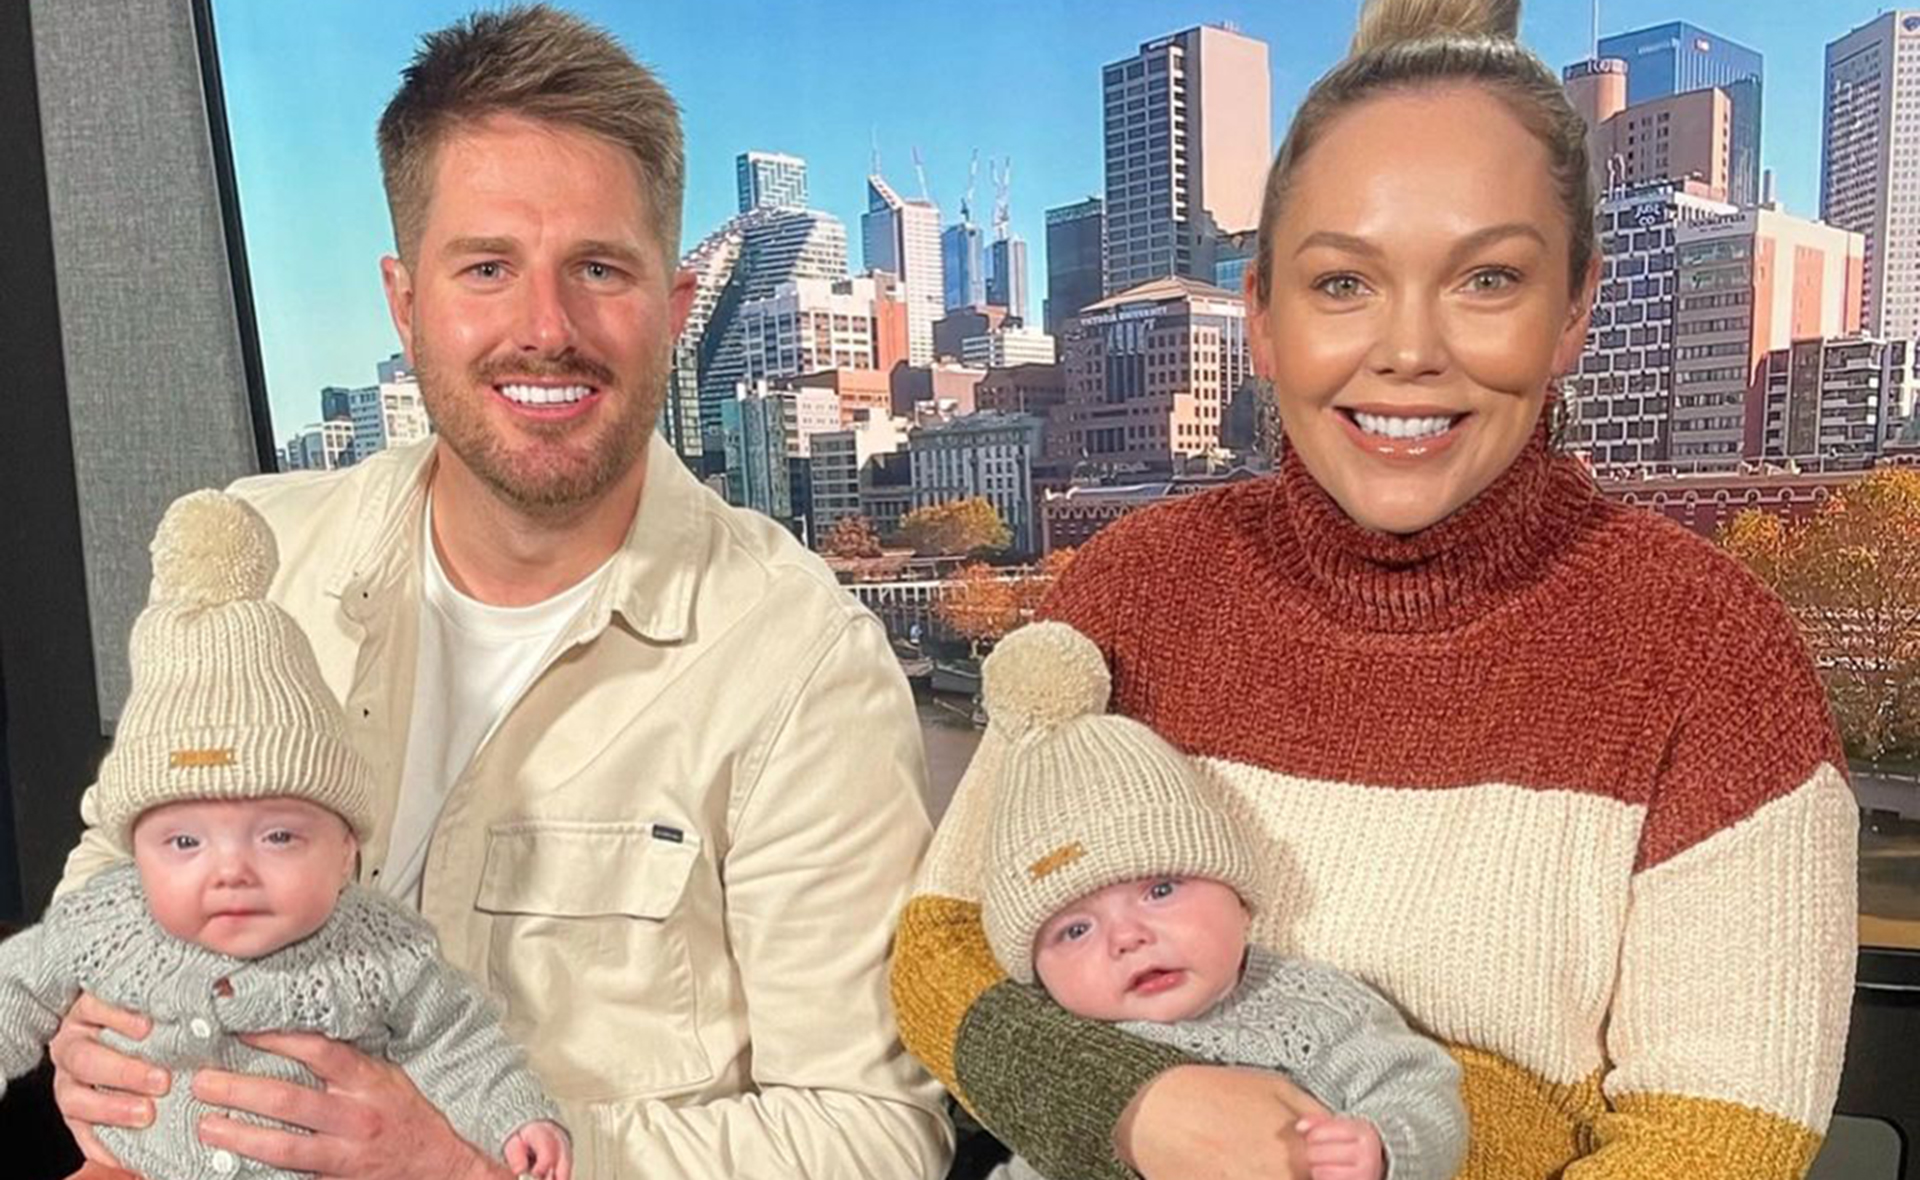 MAFS stars Melissa Rawson and Bryce Ruthven celebrate an exciting relationship milestone